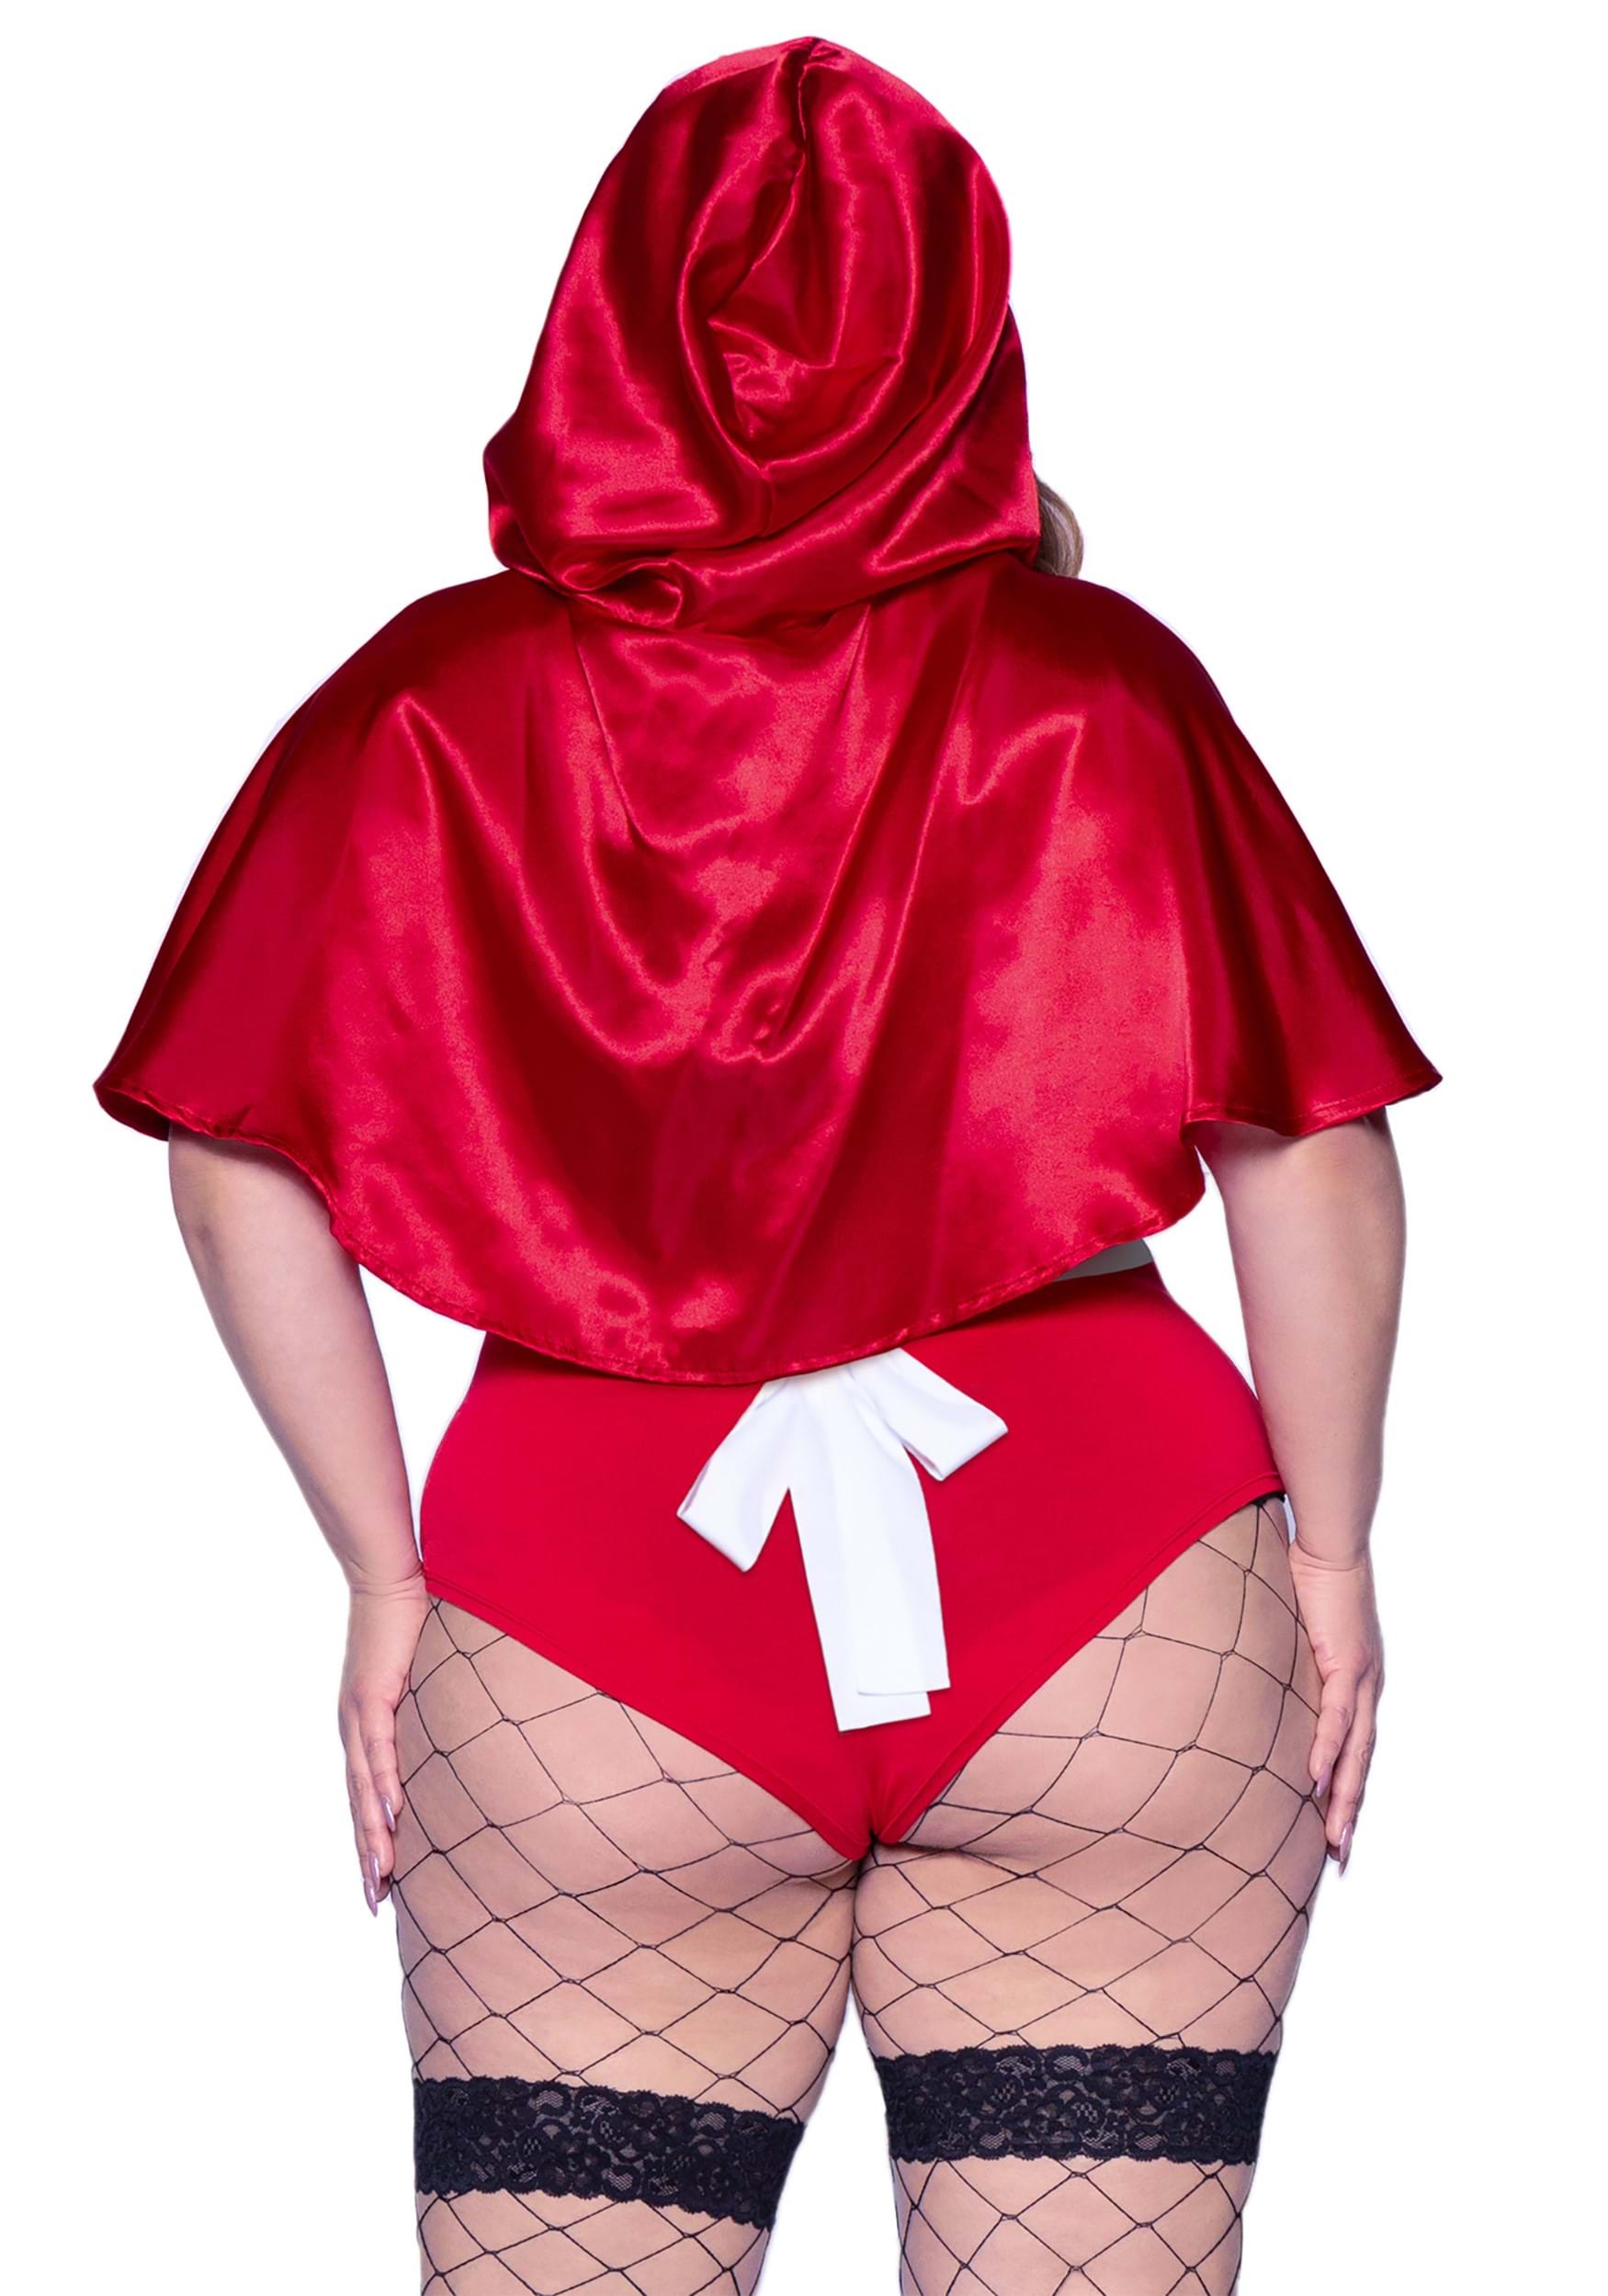 Plus Size Women's Naughty Miss Red Costume